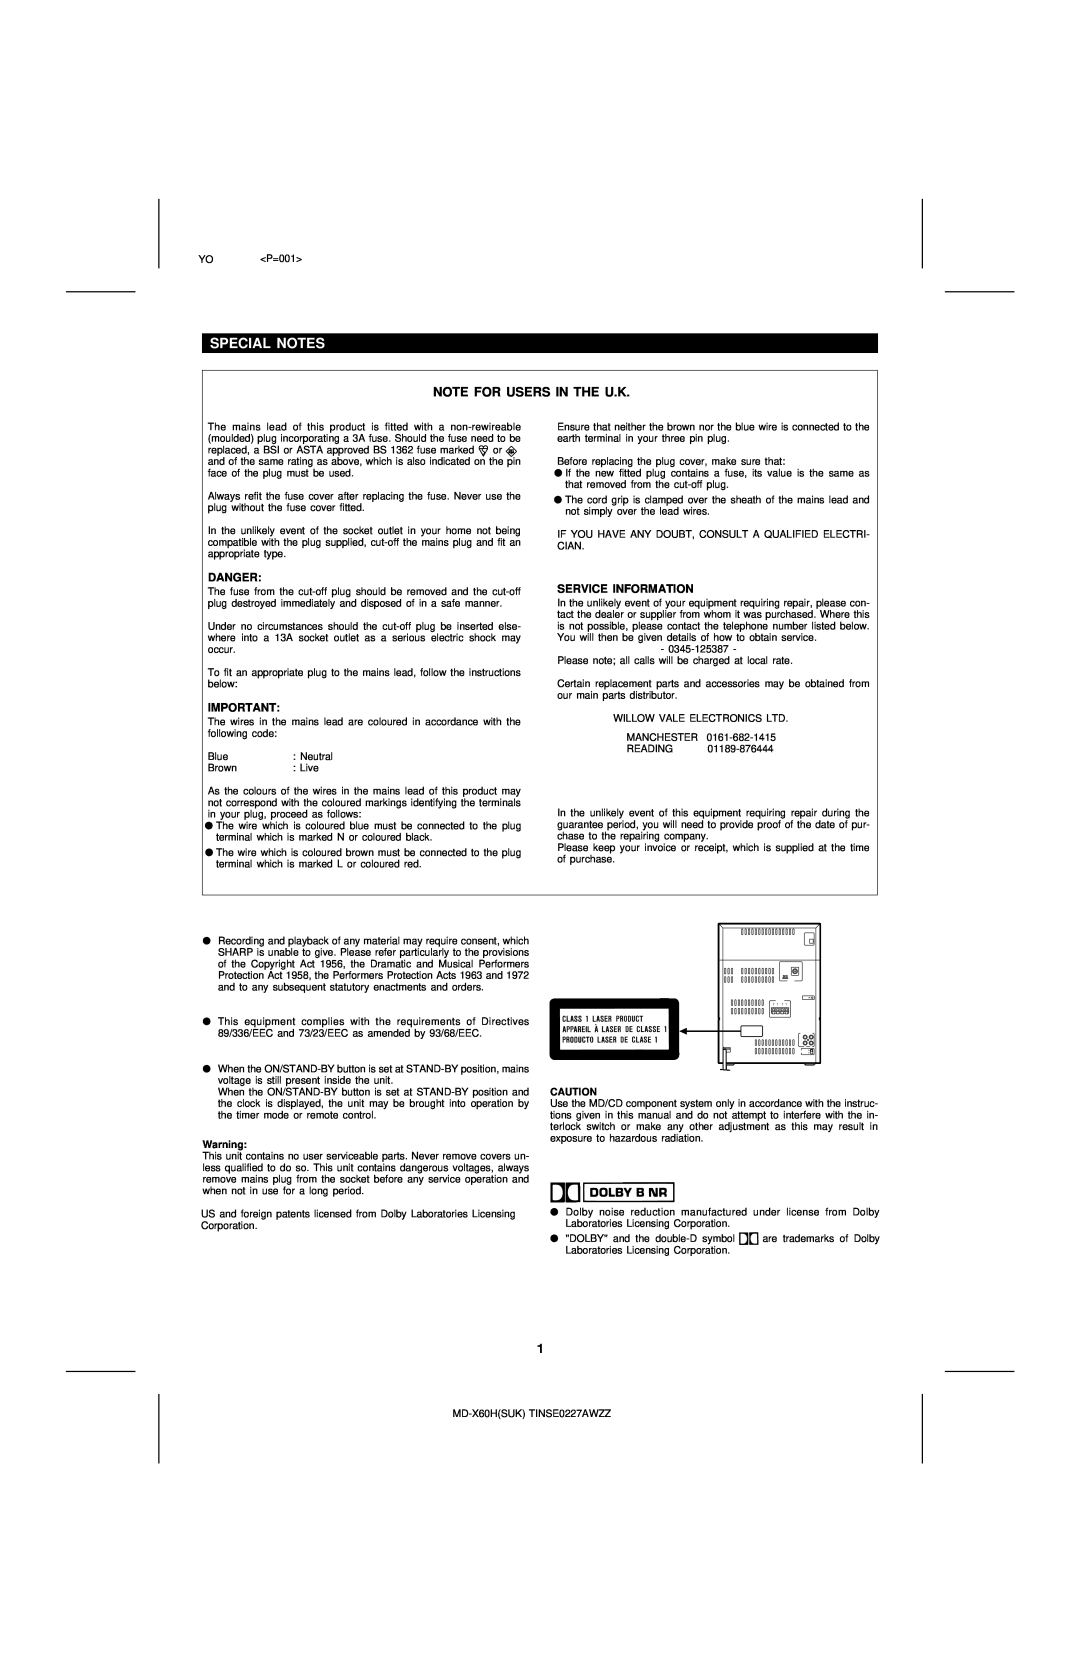 Sharp MD-X60H operation manual Special Notes, Note For Users In The U.K, Danger, Service Information 